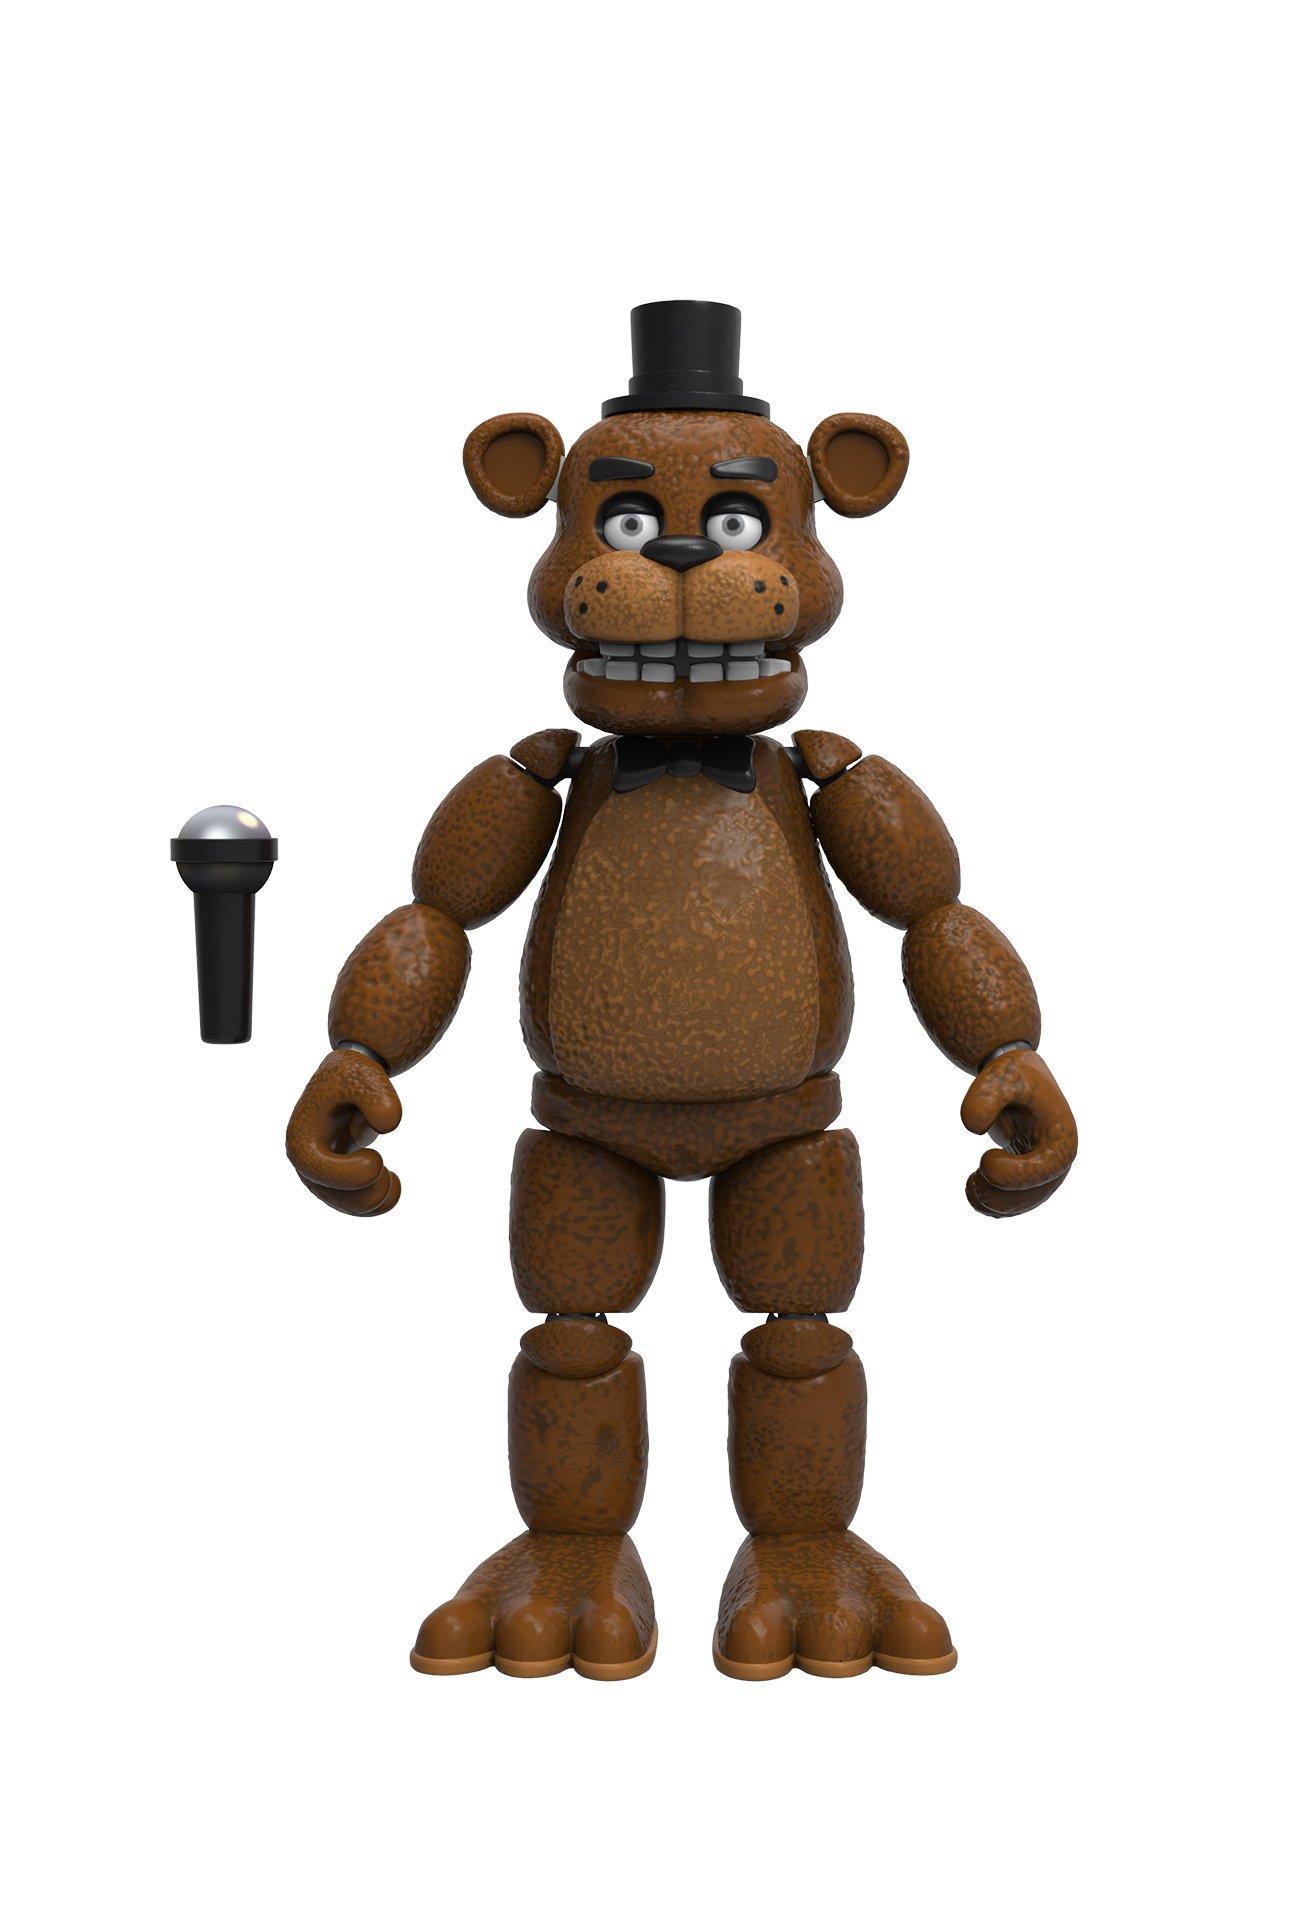 Funko Action Figure: Five Nights At Freddy's: Curse of Dread Bear